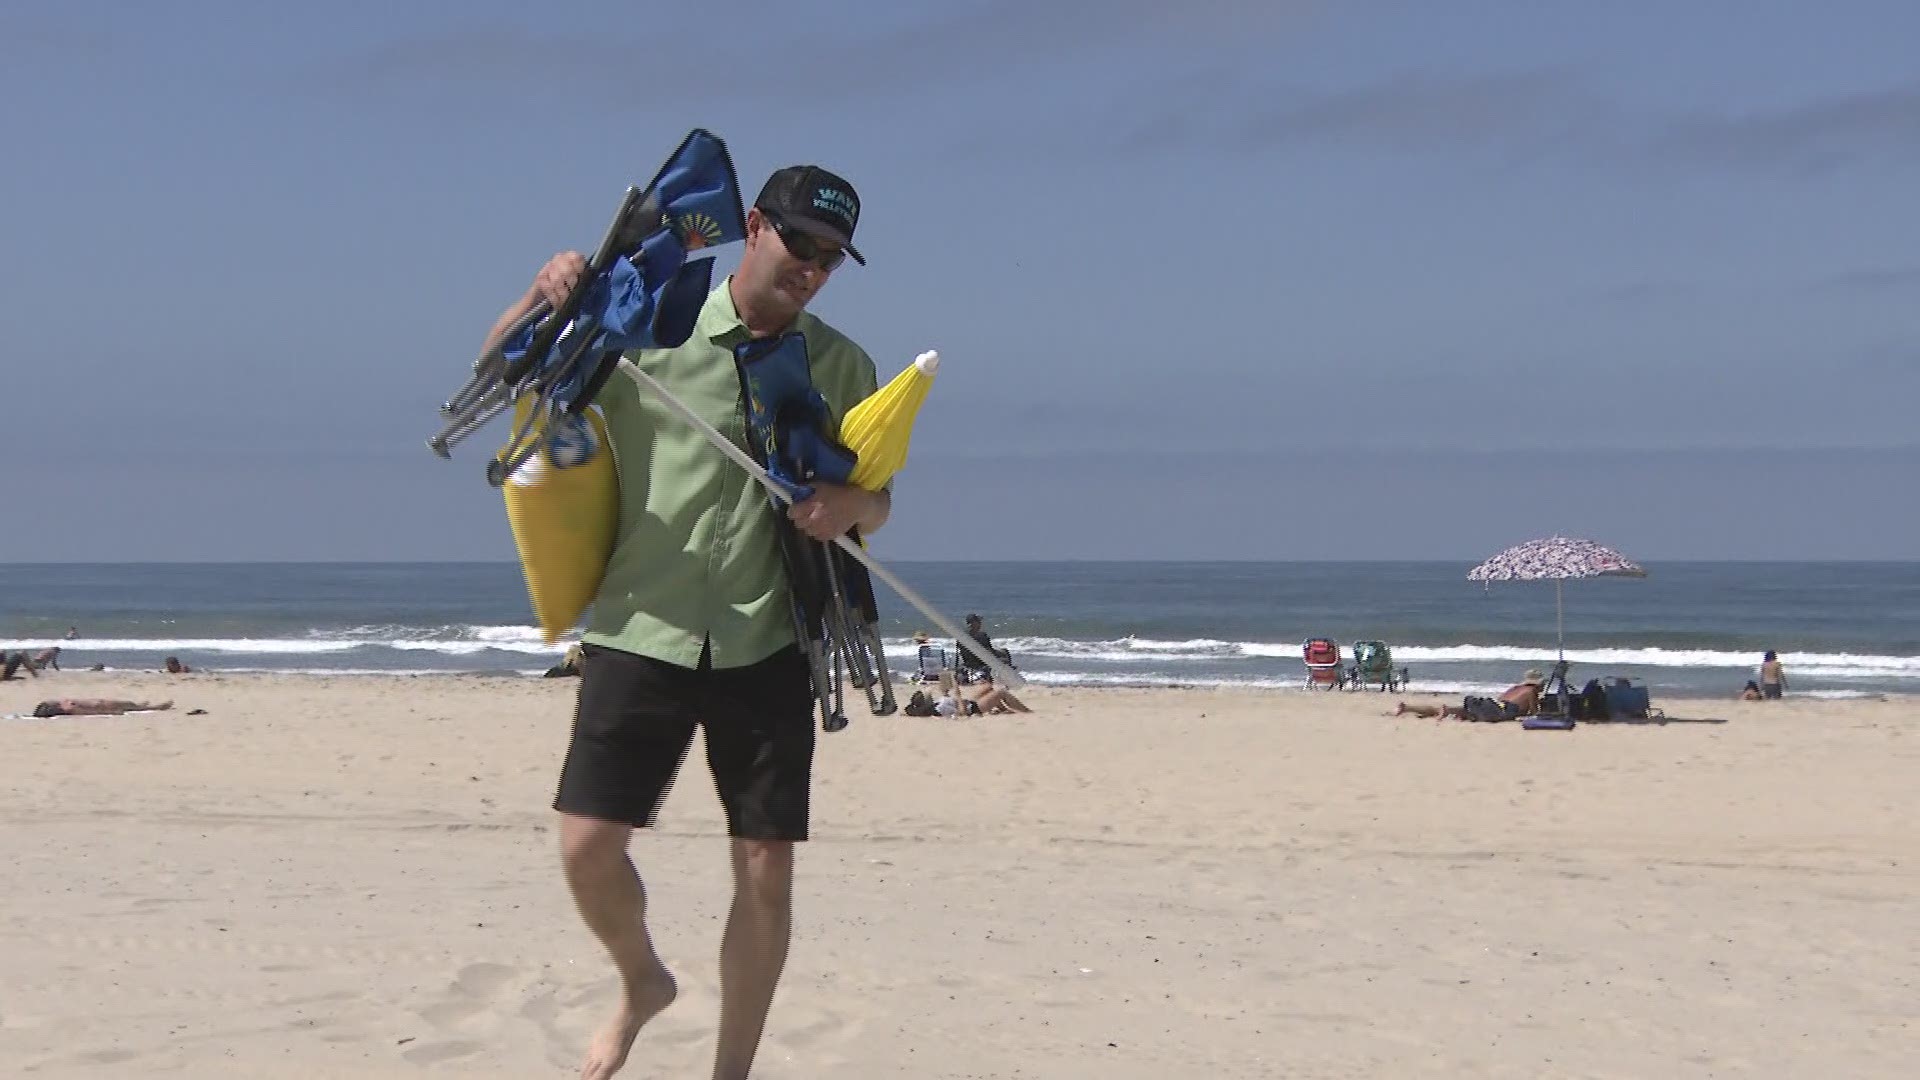 Going to the beach with your family can be a real chore - carrying beach chairs, umbrellas, and other gear. What if somebody would haul all of the gear for you?